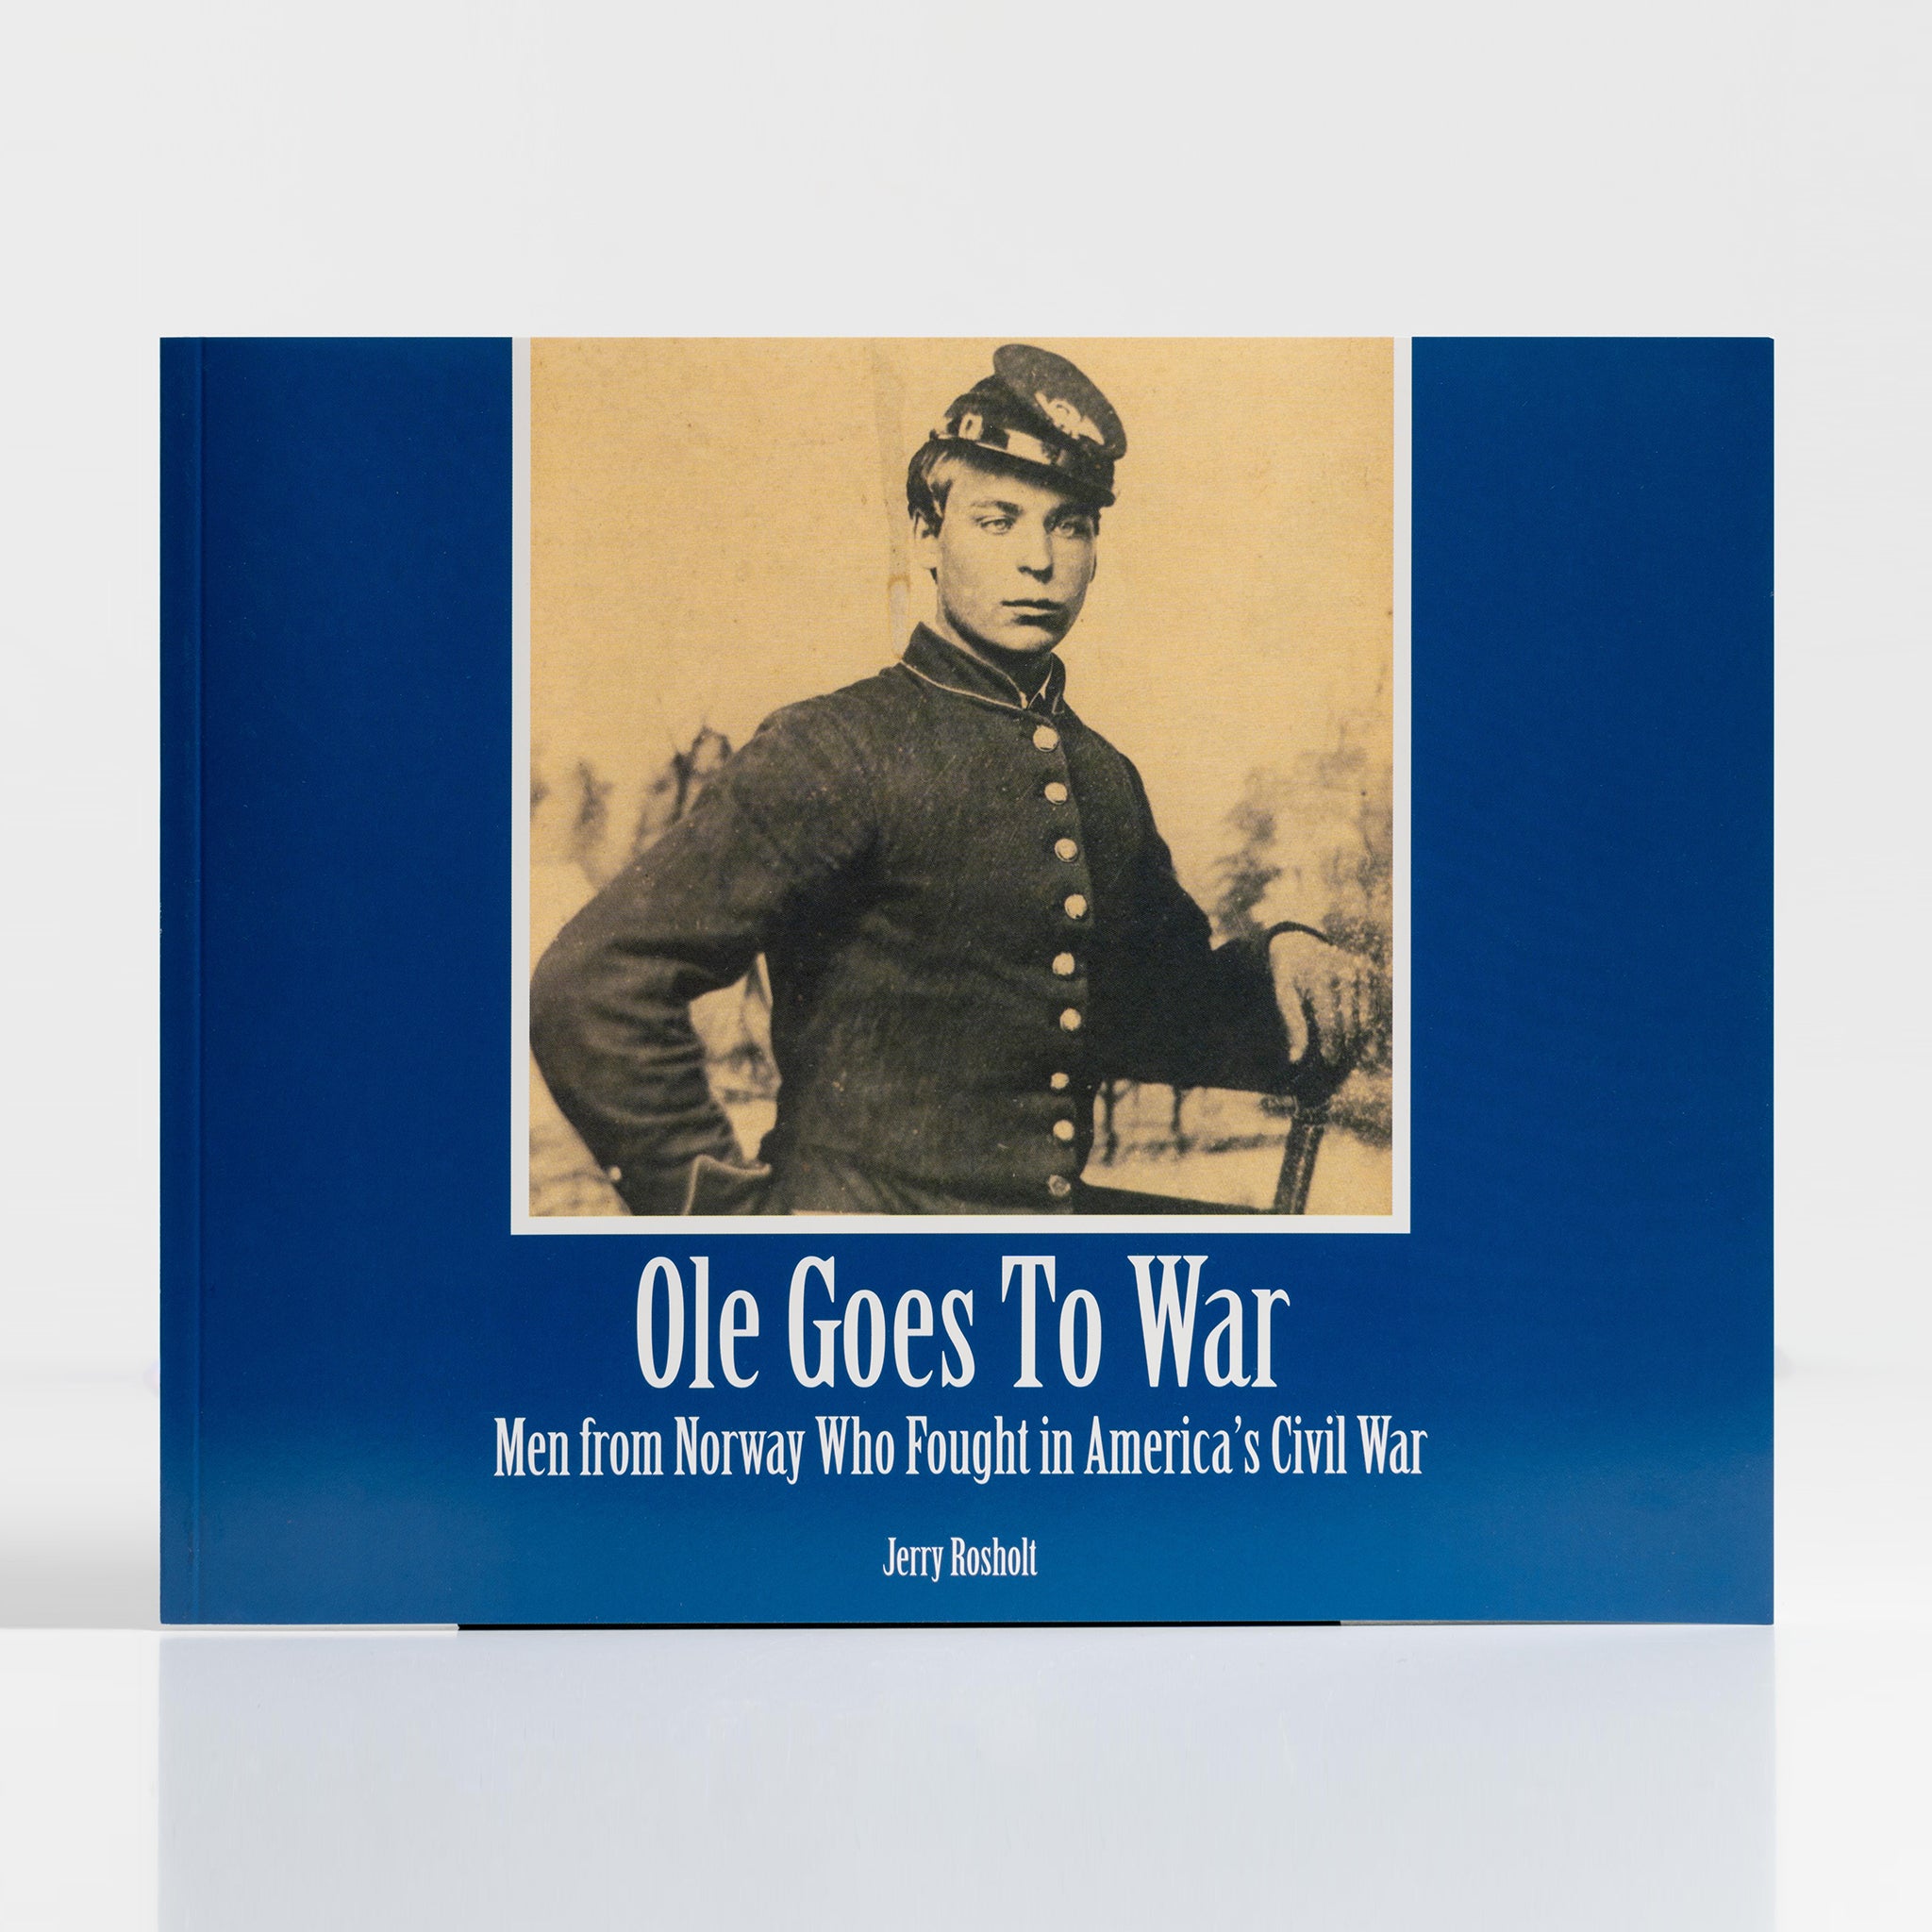 Ole Goes To War: Men from Norway Who Fought in America's Civil War by Jerry Rosholt